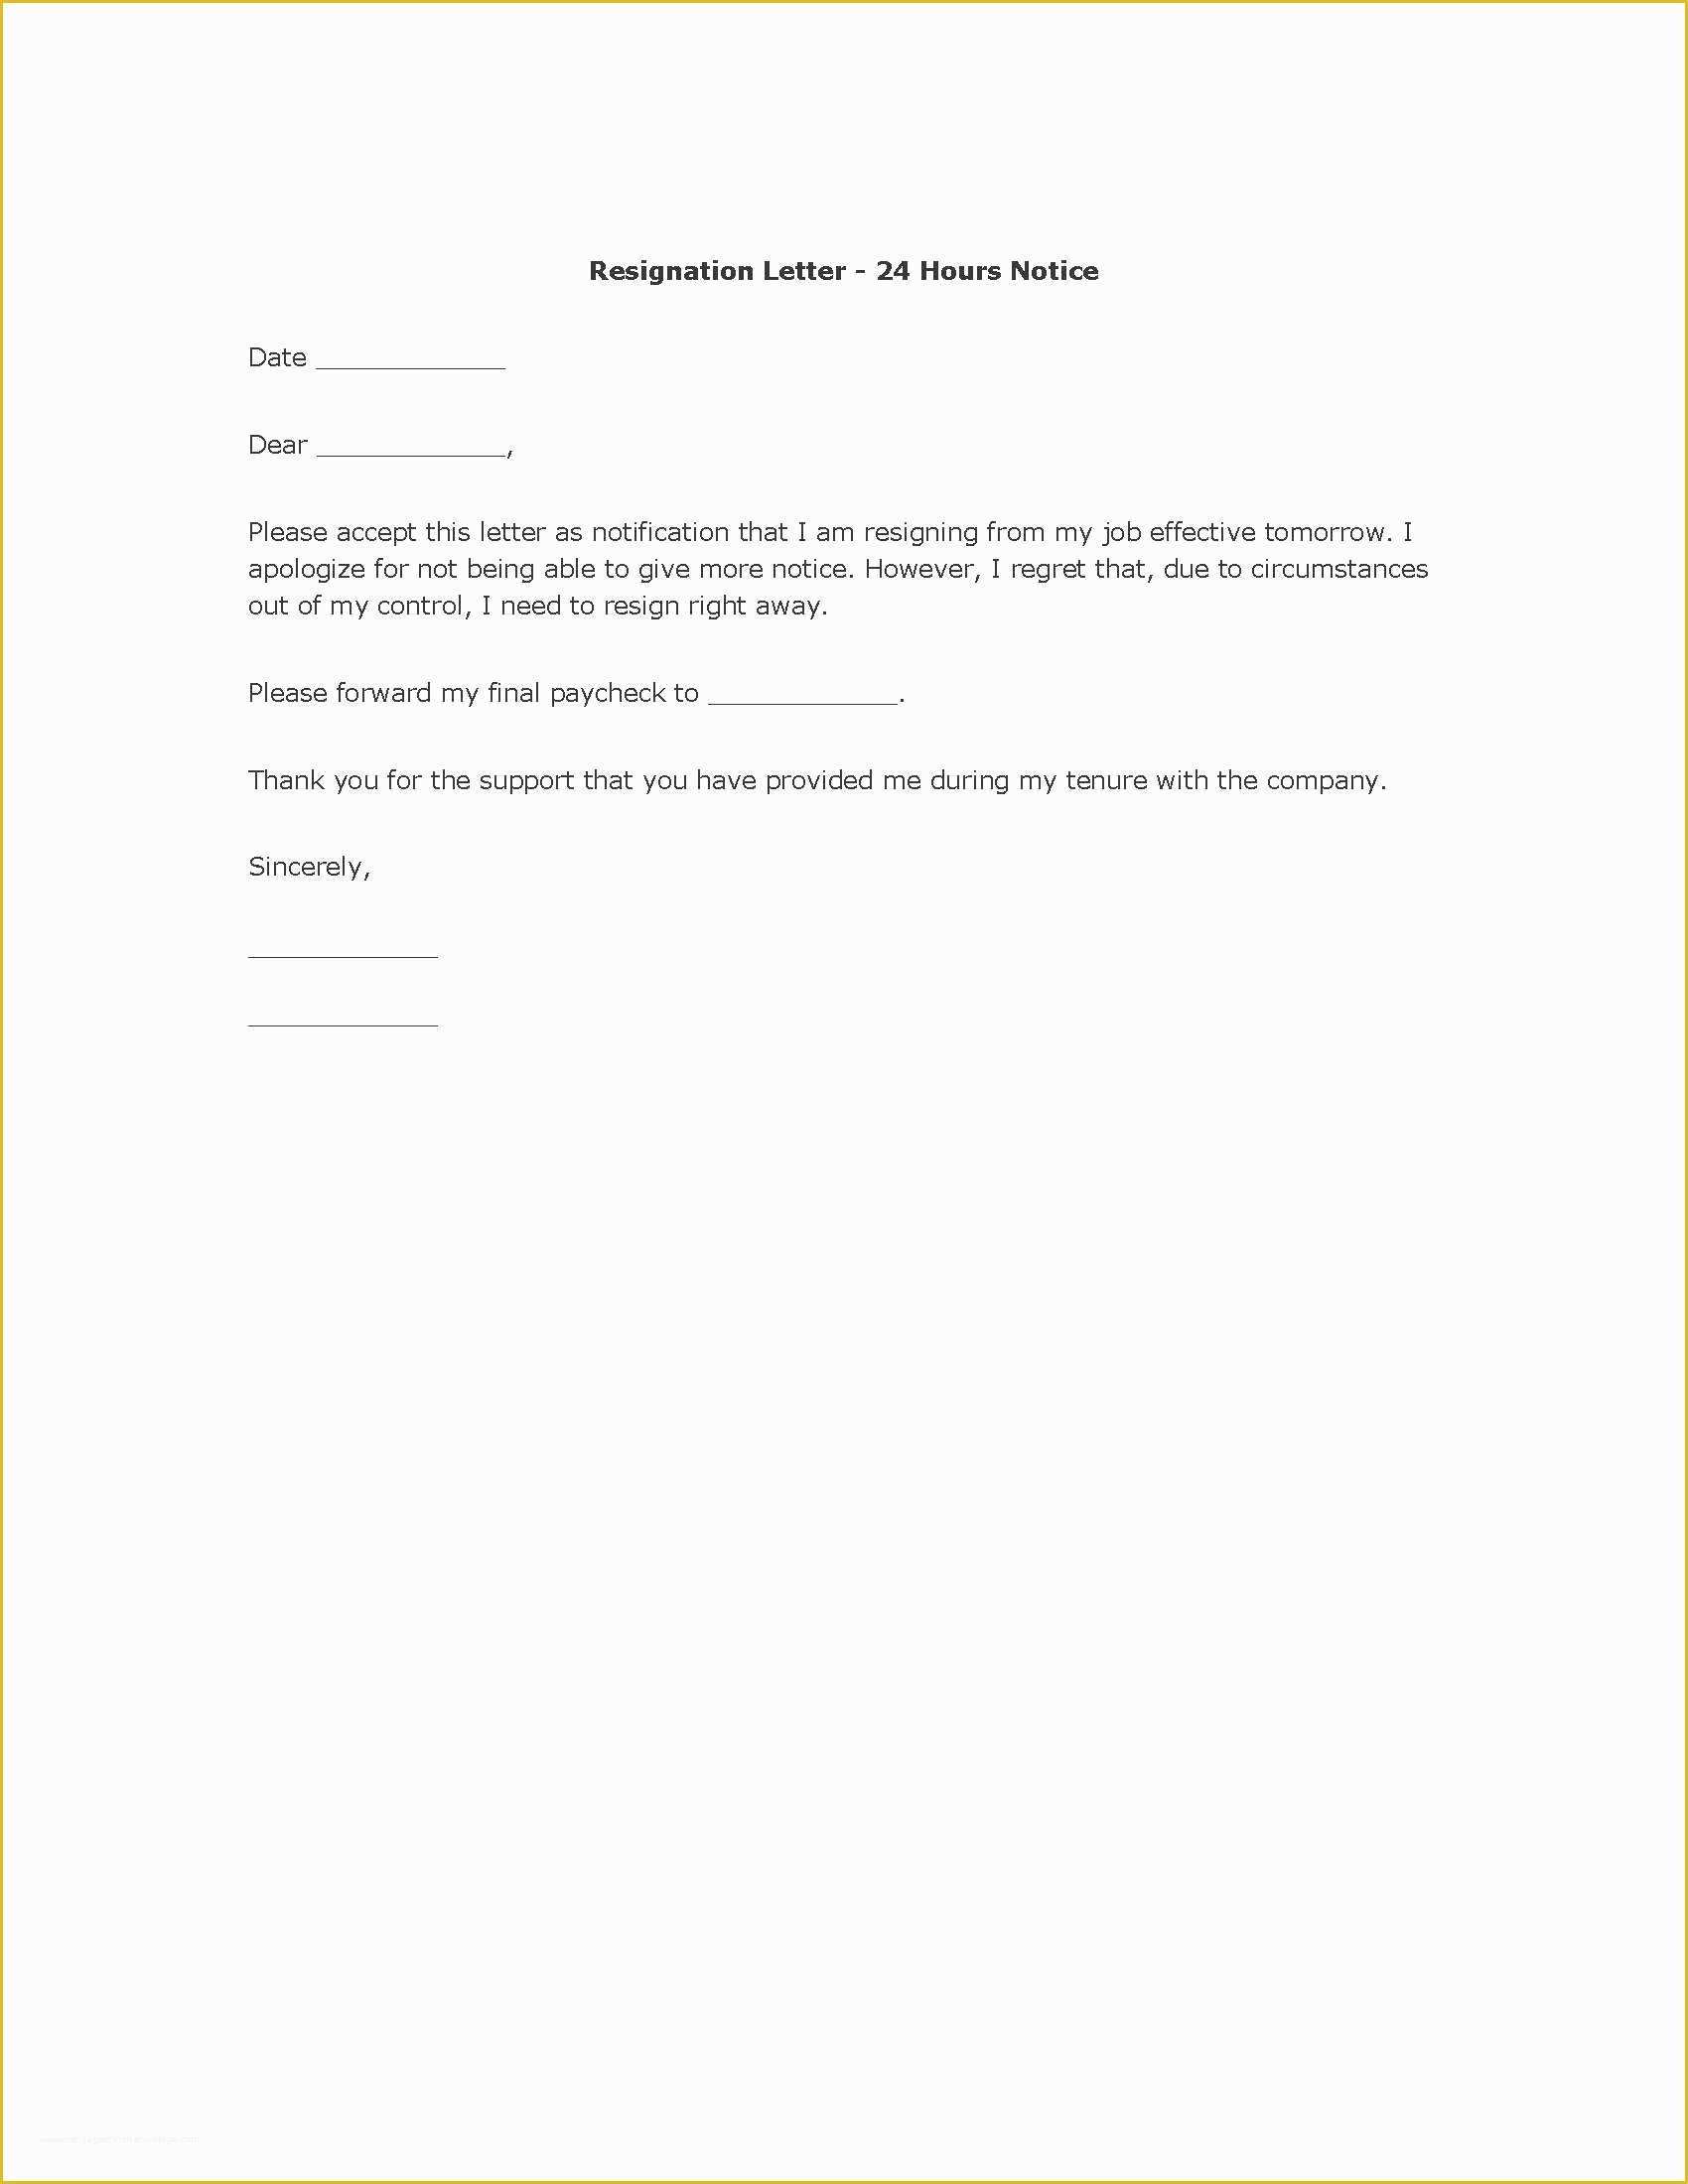 Resignation Letter Template Free Of Free Resignation Letter Template 24 Hour Notice